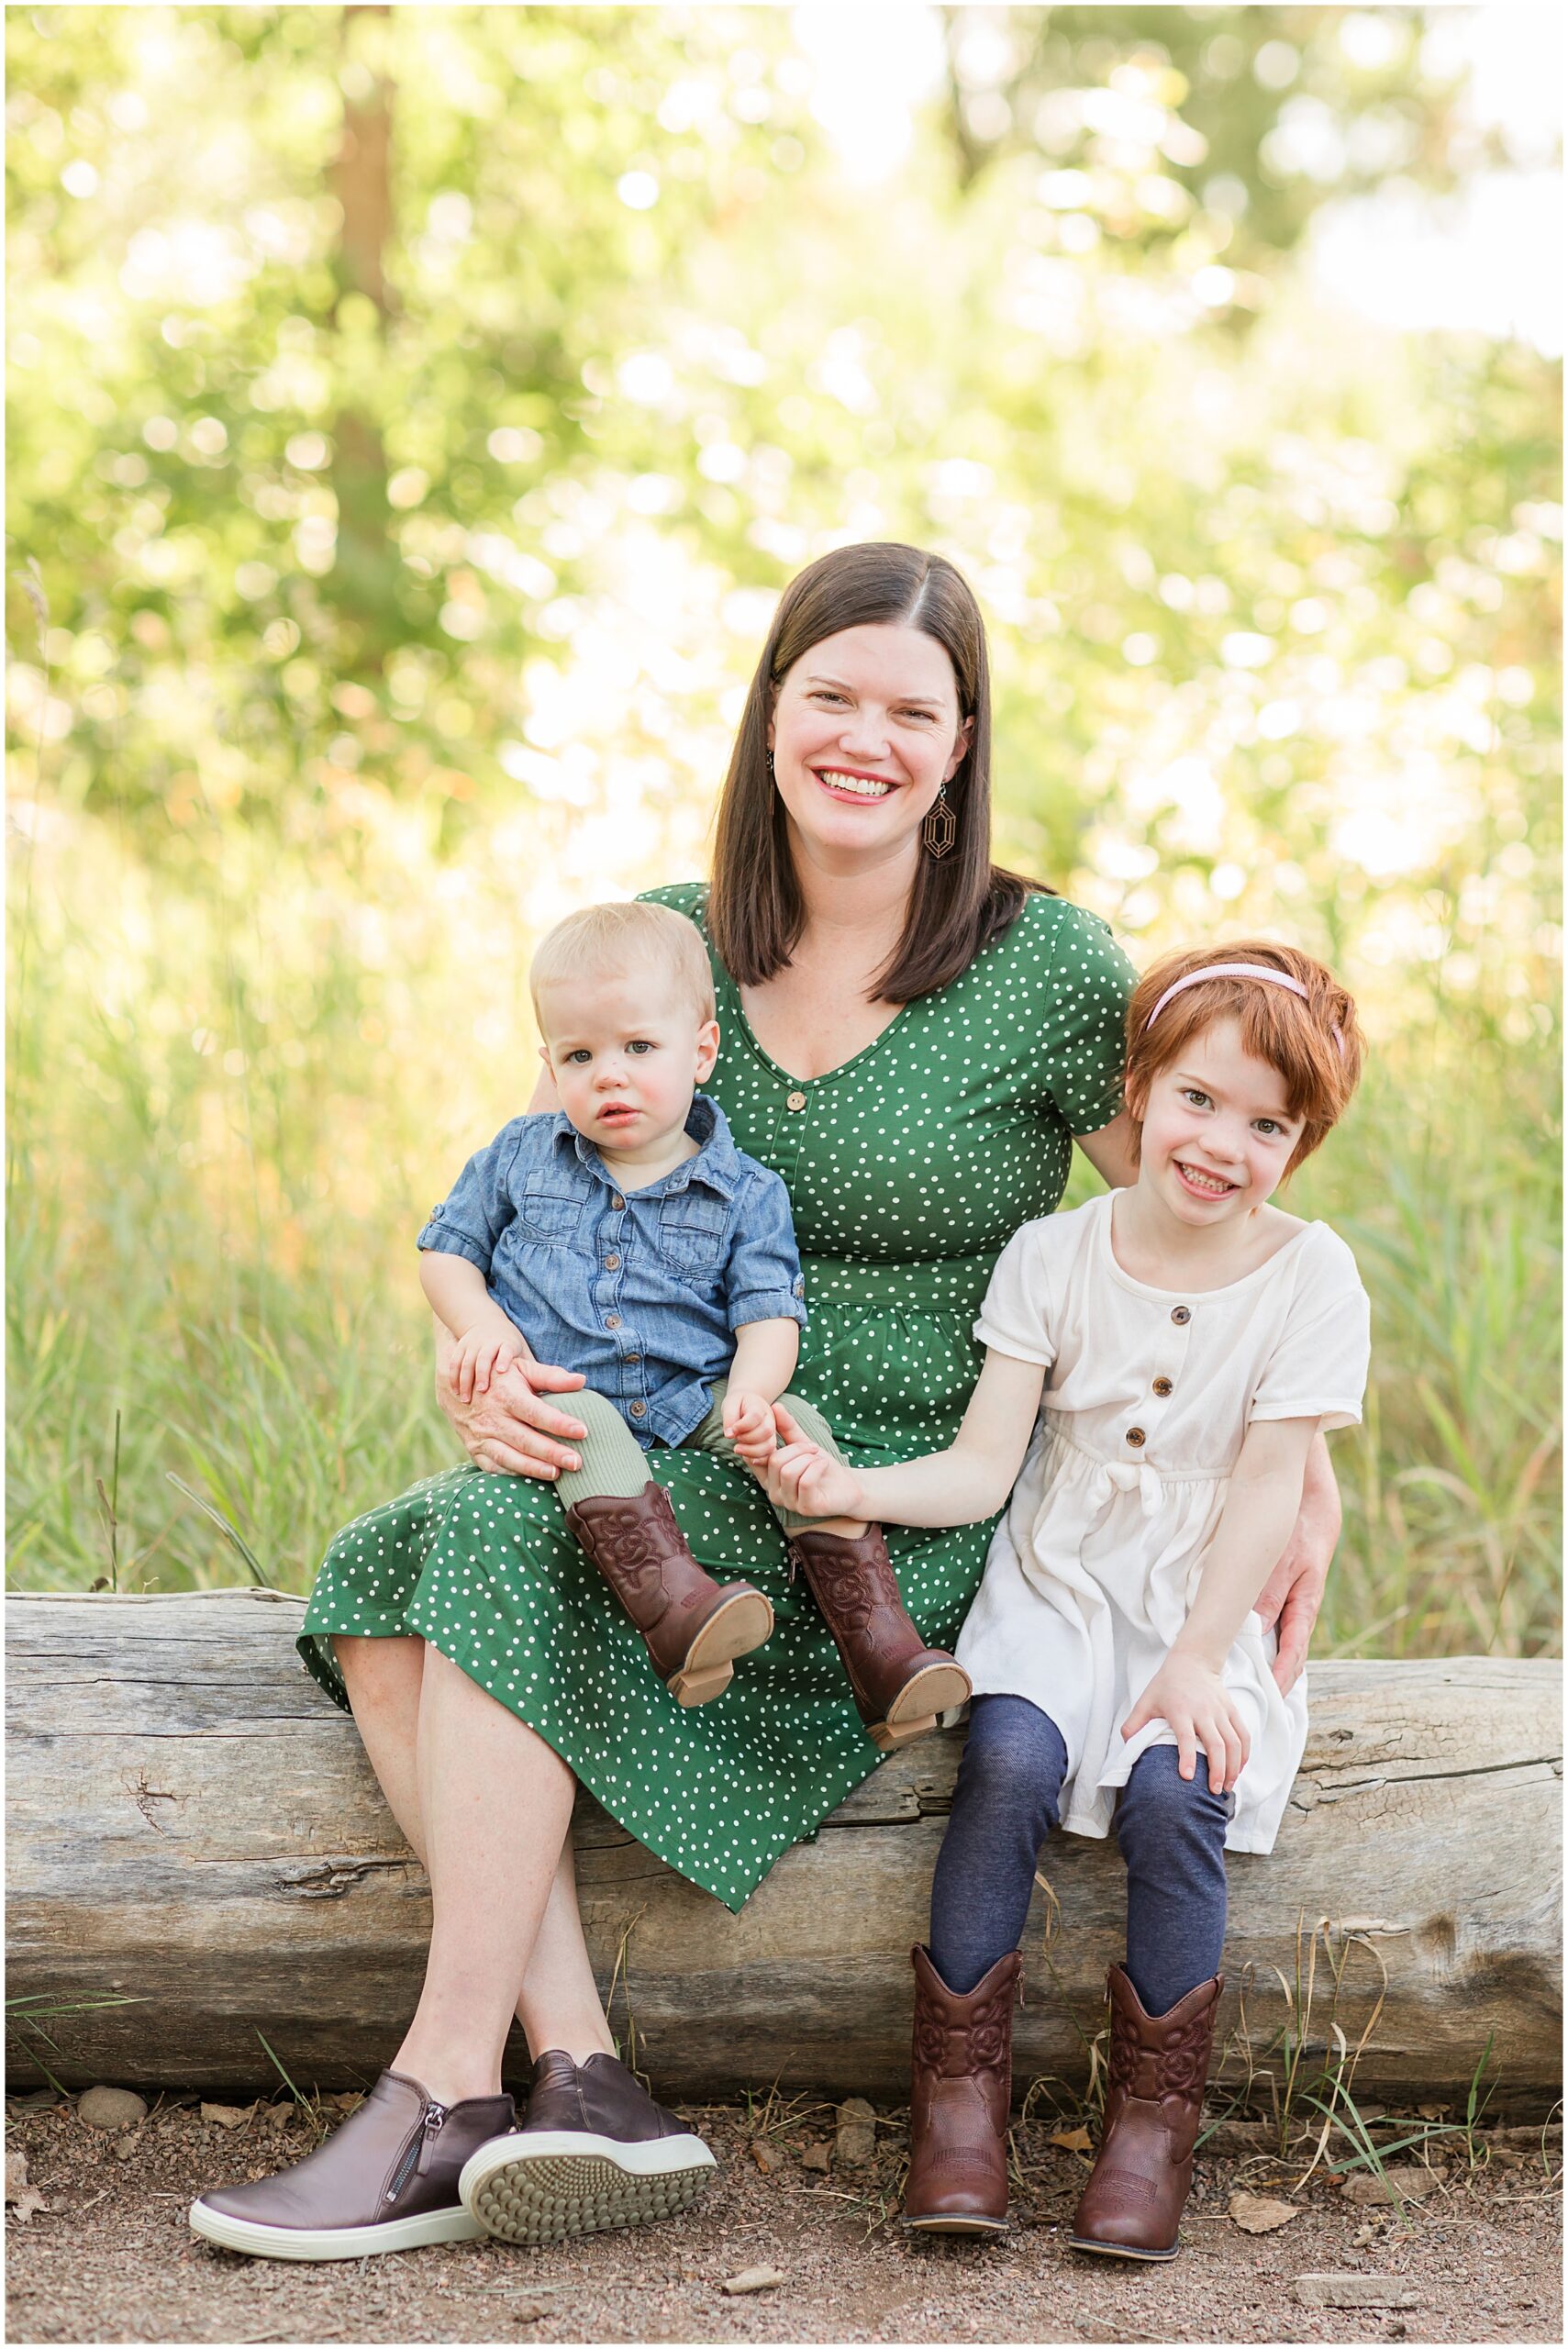 Mother hugging children in a joyful moment, captured in a mini family session by Theresa Pelser Photography